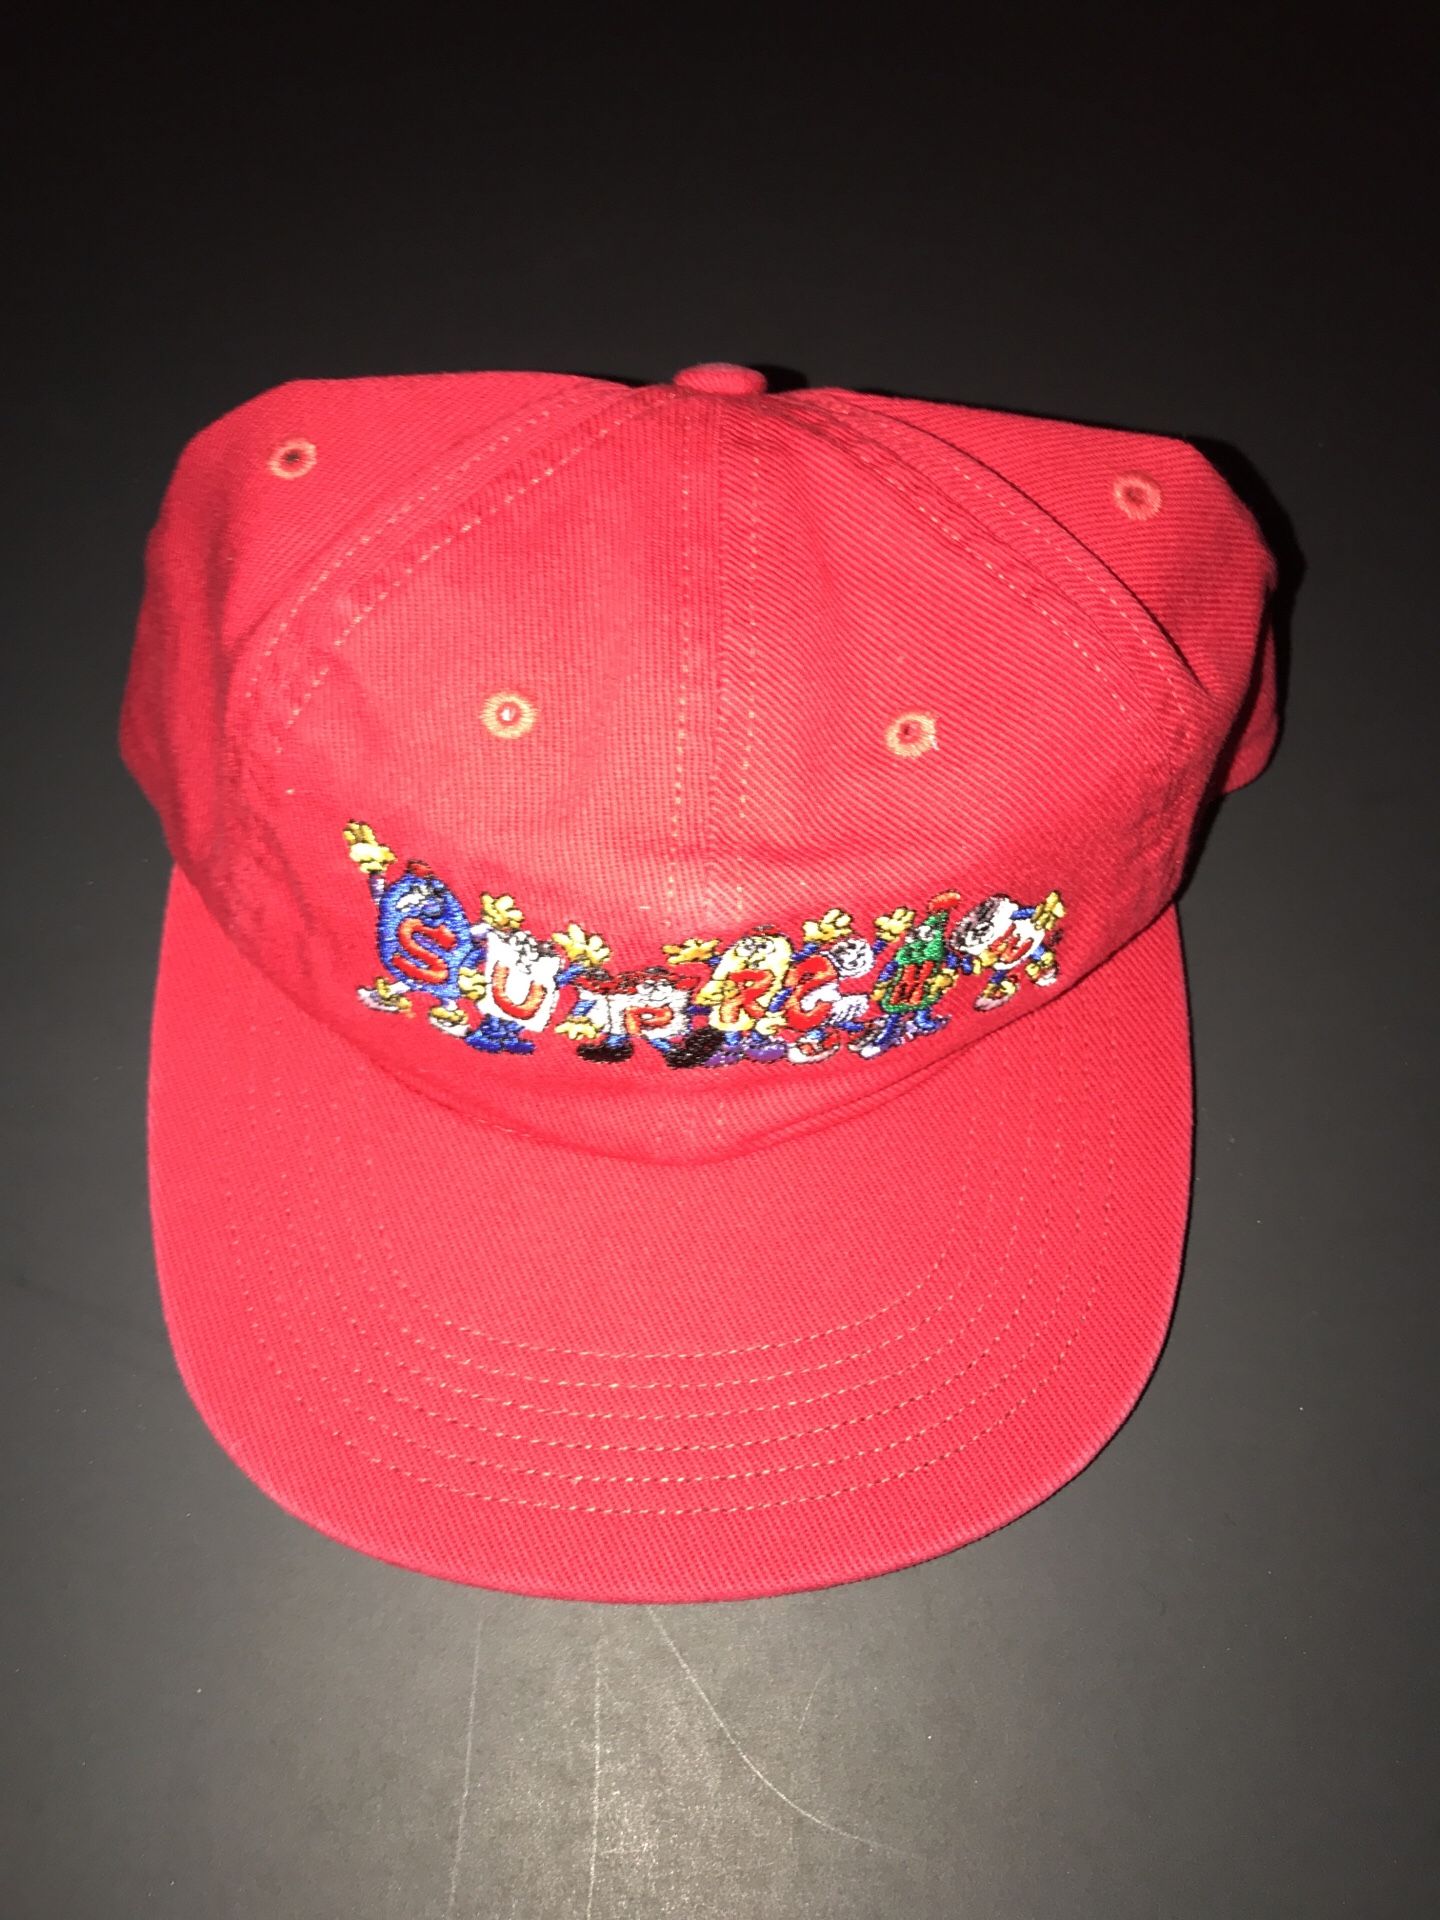 SUPREME FRIENDS 6 PANEL CAP NEW HAT RED